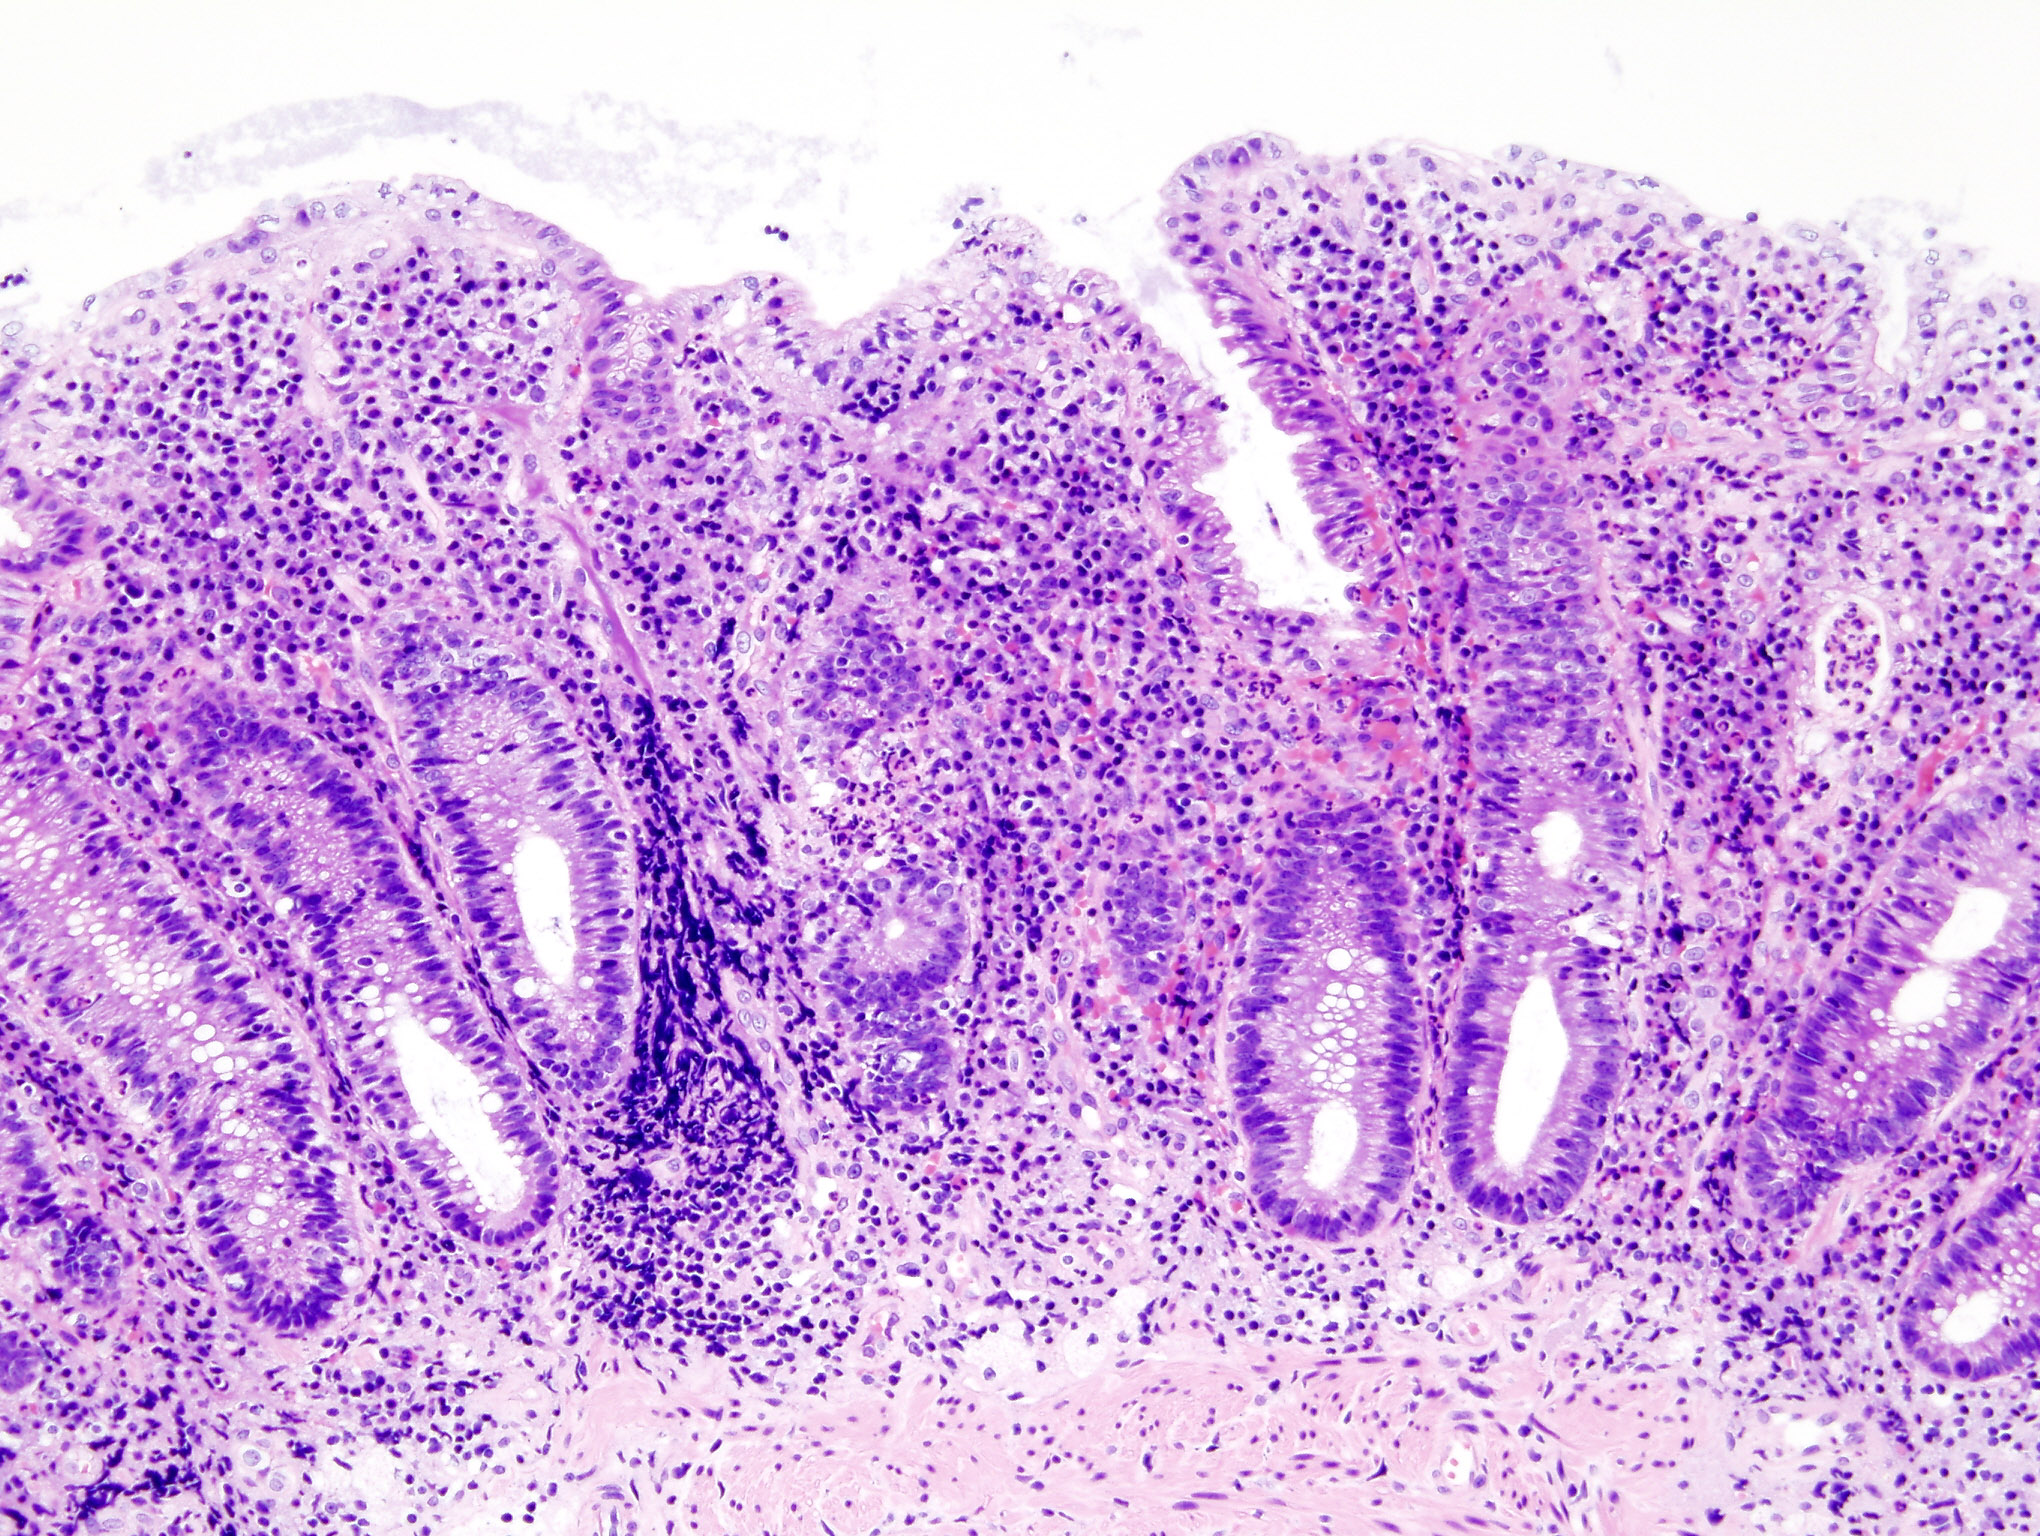 Ulcerative colitis. H&E stain showing marked lymphocytic infiltration (blue/purple) of the intestinal mucosa and distortion of the architecture of the crypts. [47]